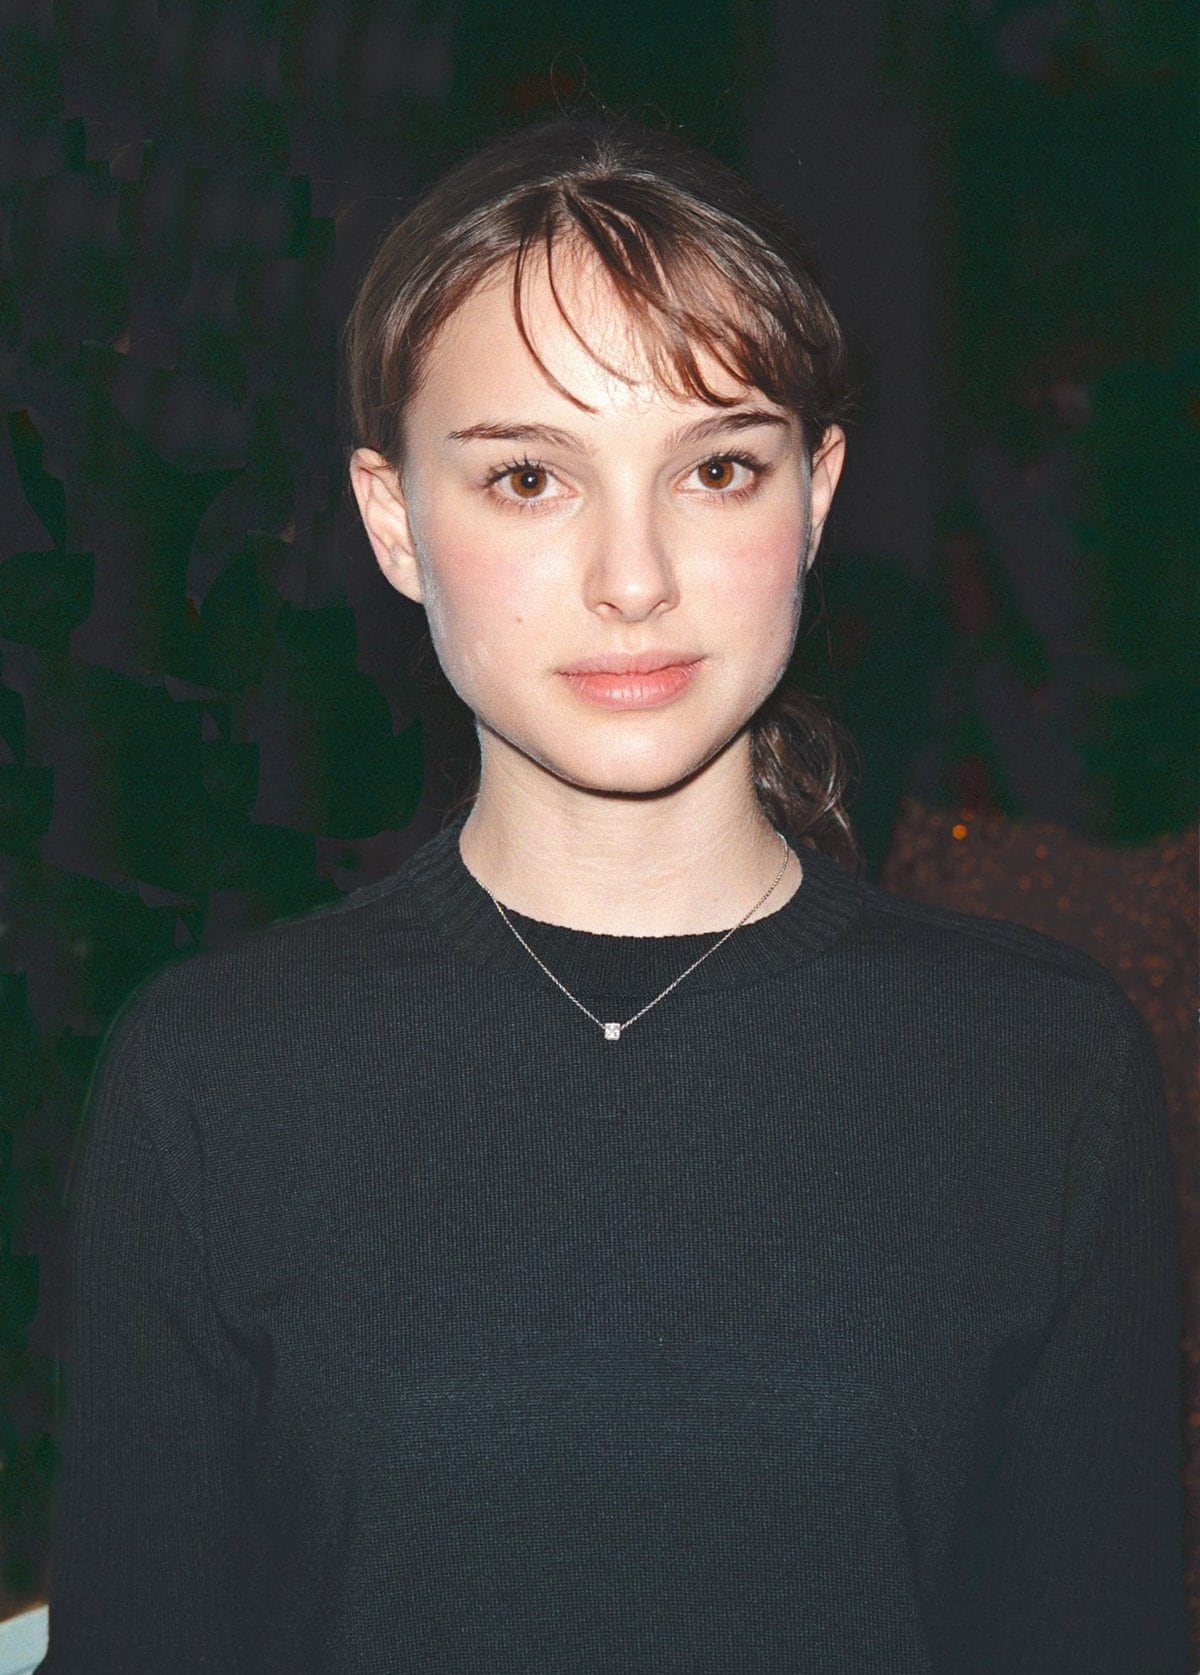 Natalie Portman could have become a model but decided to pursue a career as an actress